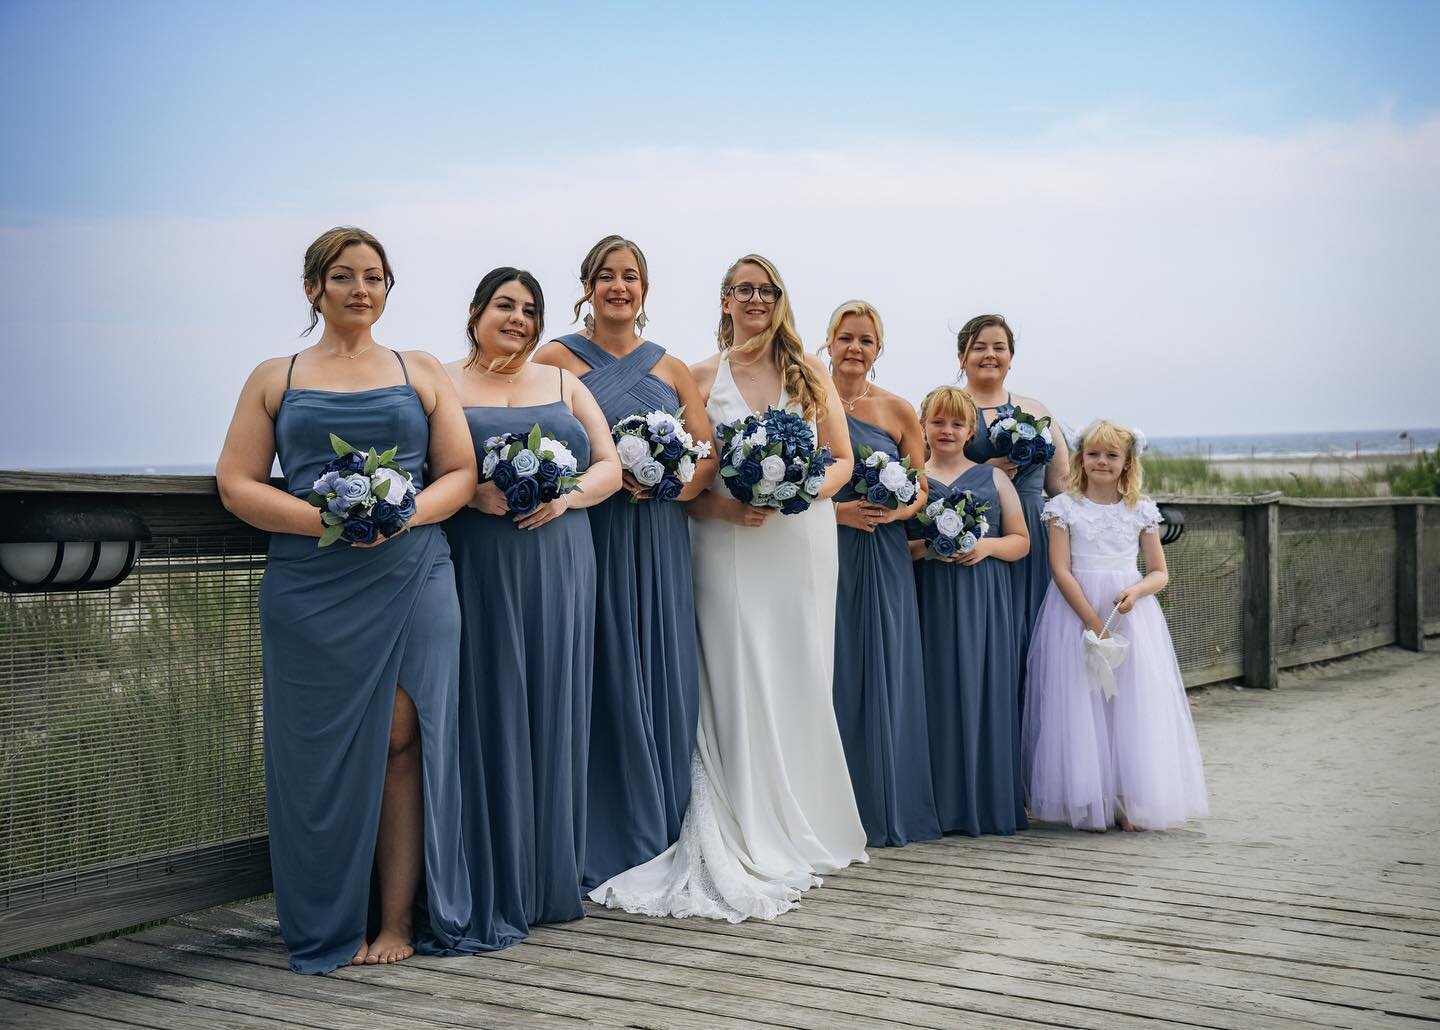 Bridesmaids on the beach 🐚  #beachweddings #bluedresses #weddingphotography #wildwoodwedding 

I have some more fun shots from last month&rsquo;s wedding coming up. Stay tuned!